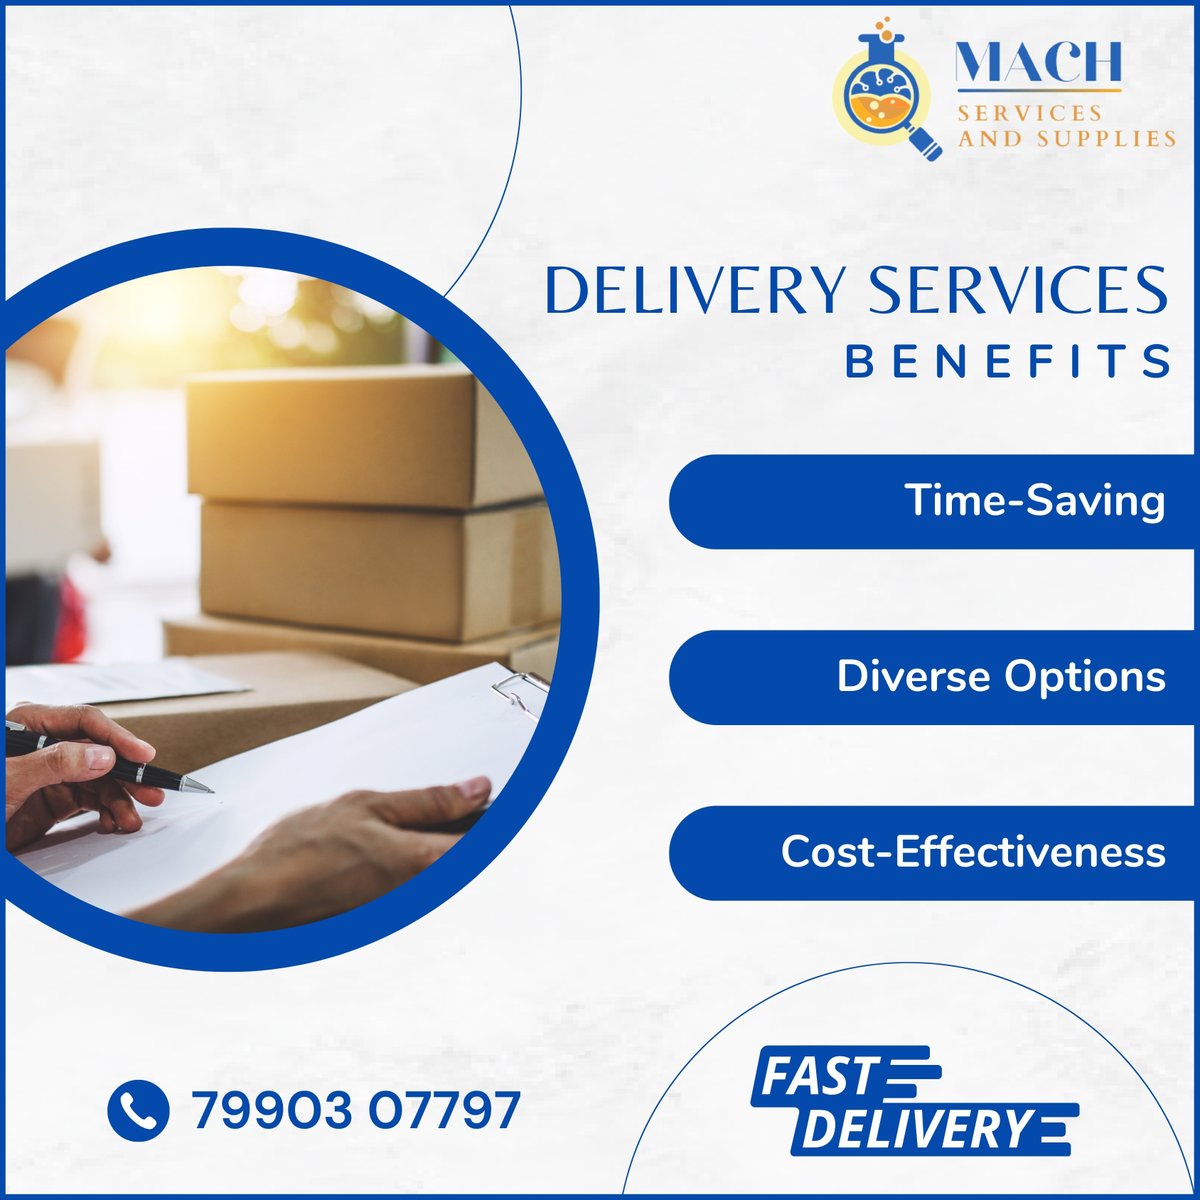 Delivery Services Benefit.
.
.
#delivery #machservicesandsupplies #machservices #deliveryservice #style #love #instagood #like #photography #motivation #motivationalquotes #inspiration #surat #suratcity #suratfood #suratphotoclub #sunofcitysurat #sürat #wearehiring #india #grow